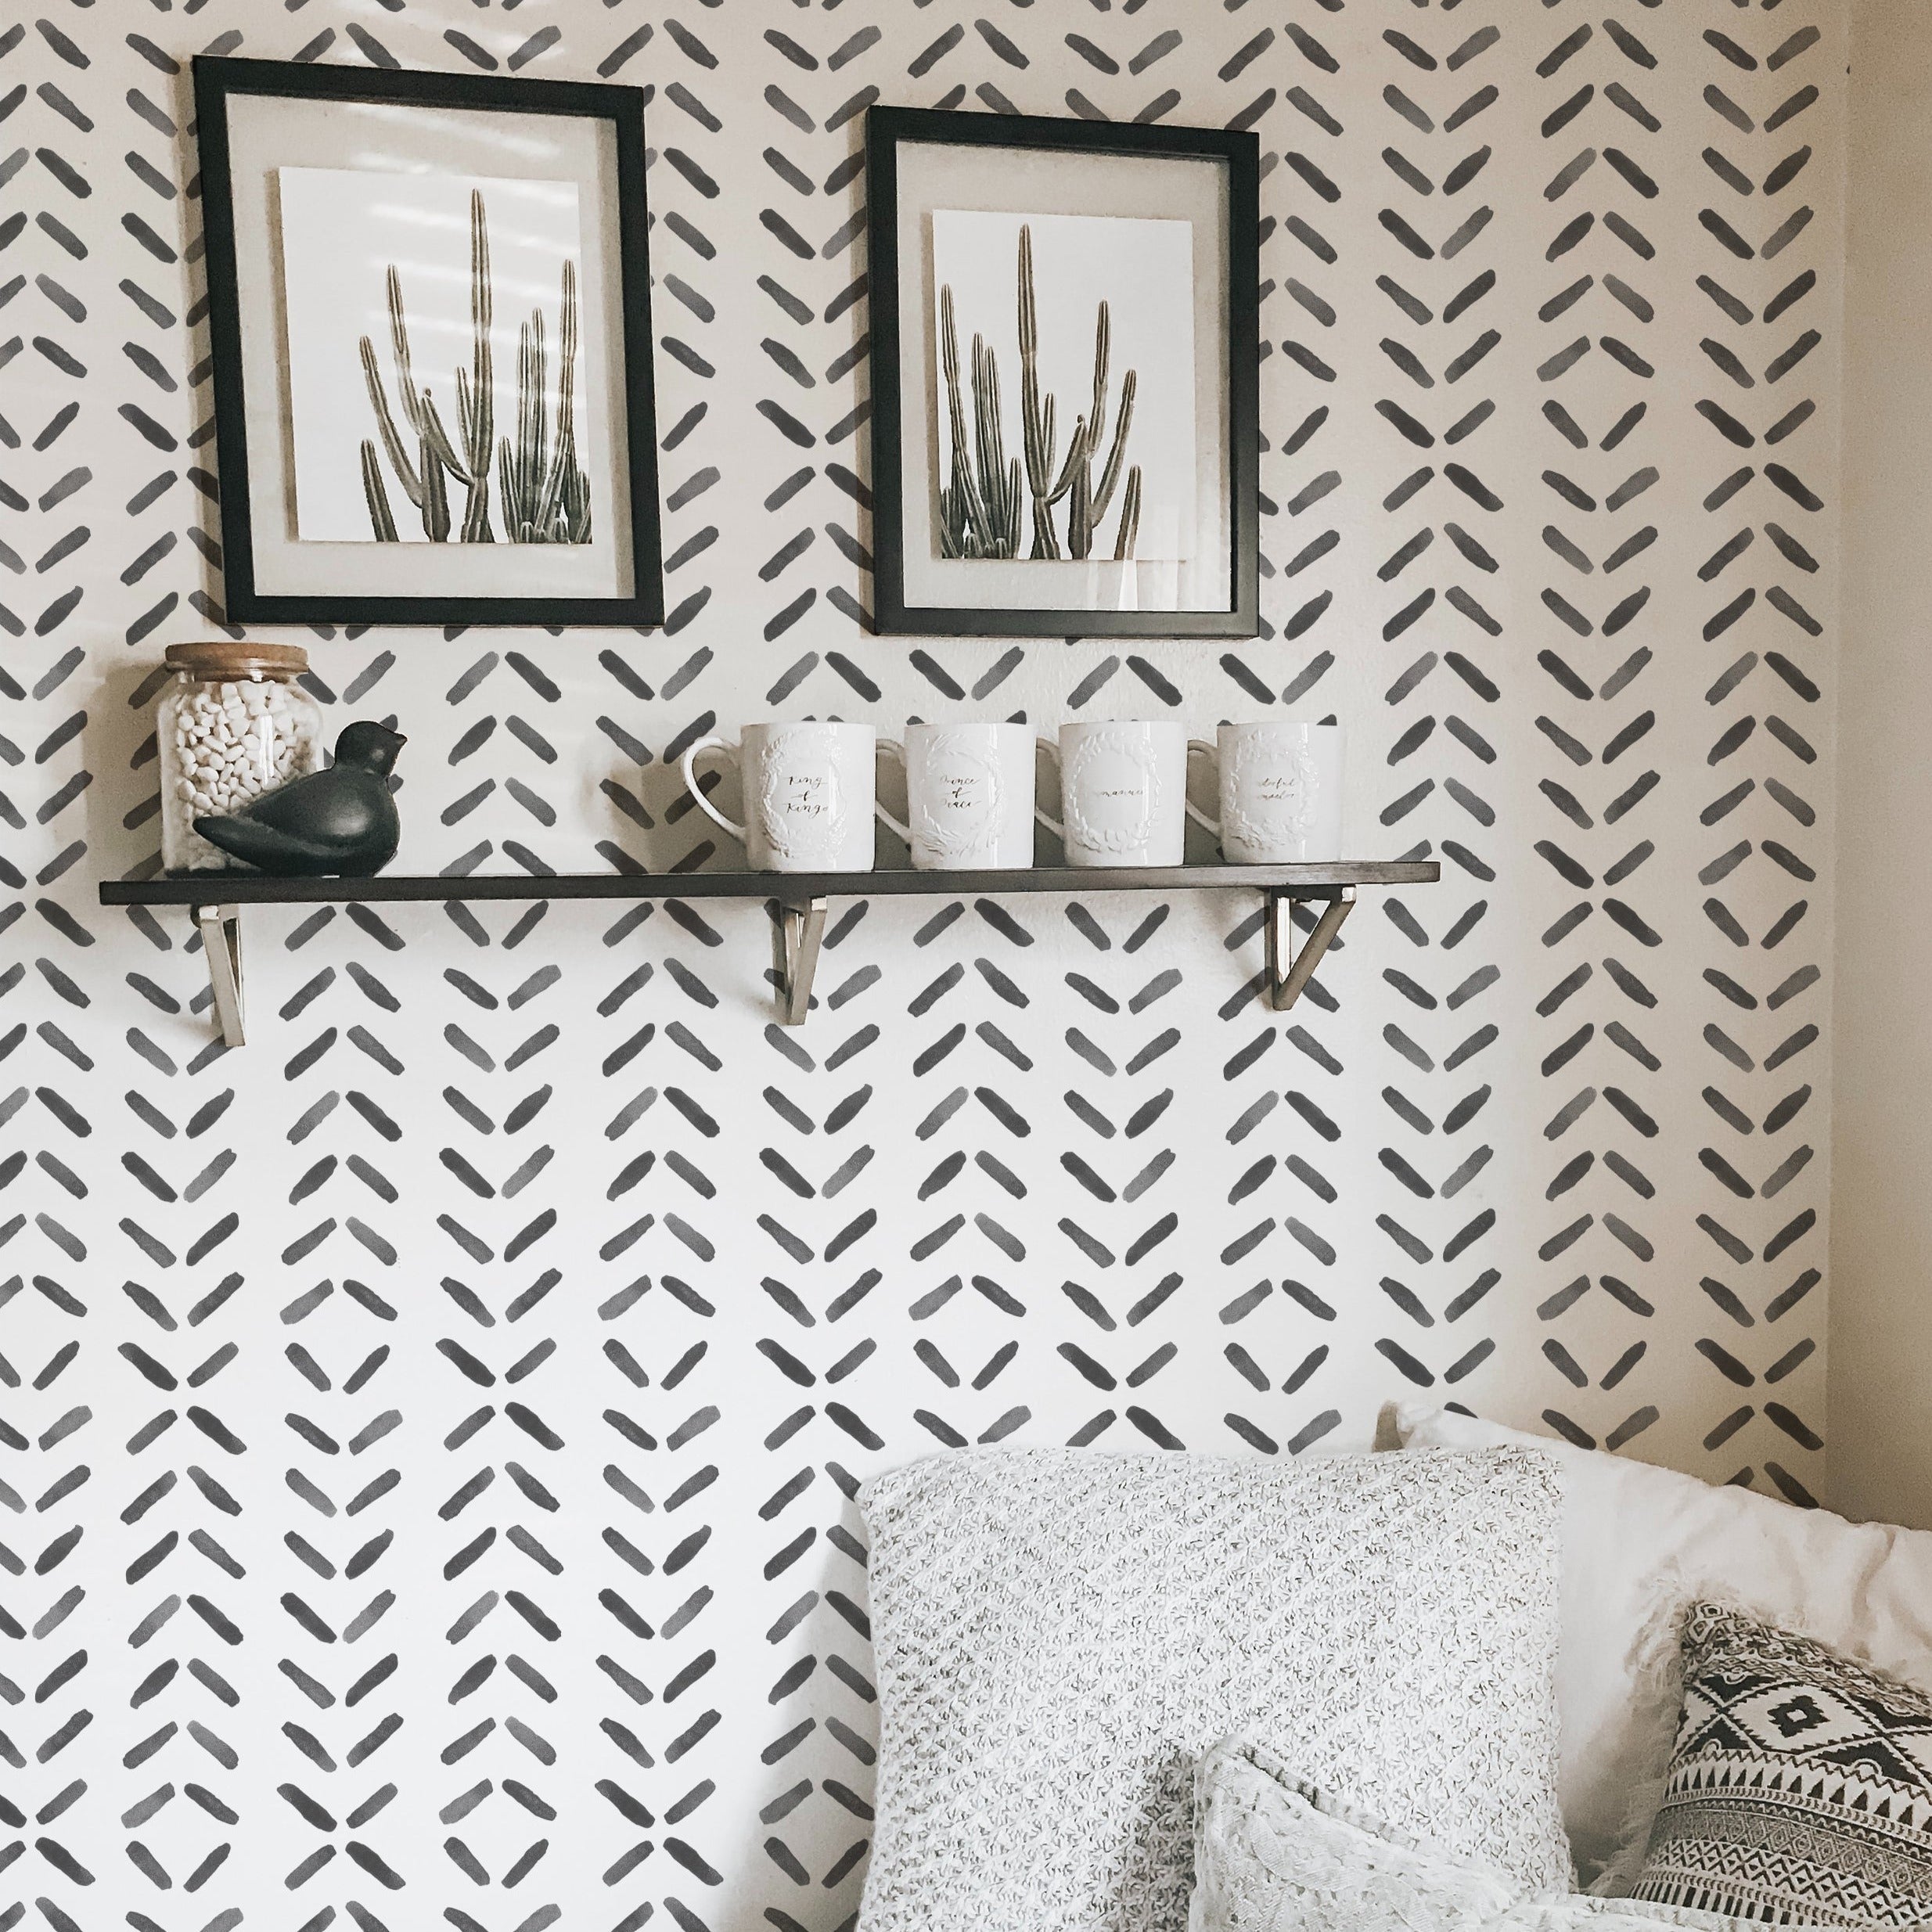 A cozy nook adorned with Boho Chevron Wallpaper featuring a repeating pattern of black chevron designs on a light background. This stylish setting is complemented by decorative shelves holding framed artwork and ceramic items, enhancing the room's modern bohemian aesthetic.